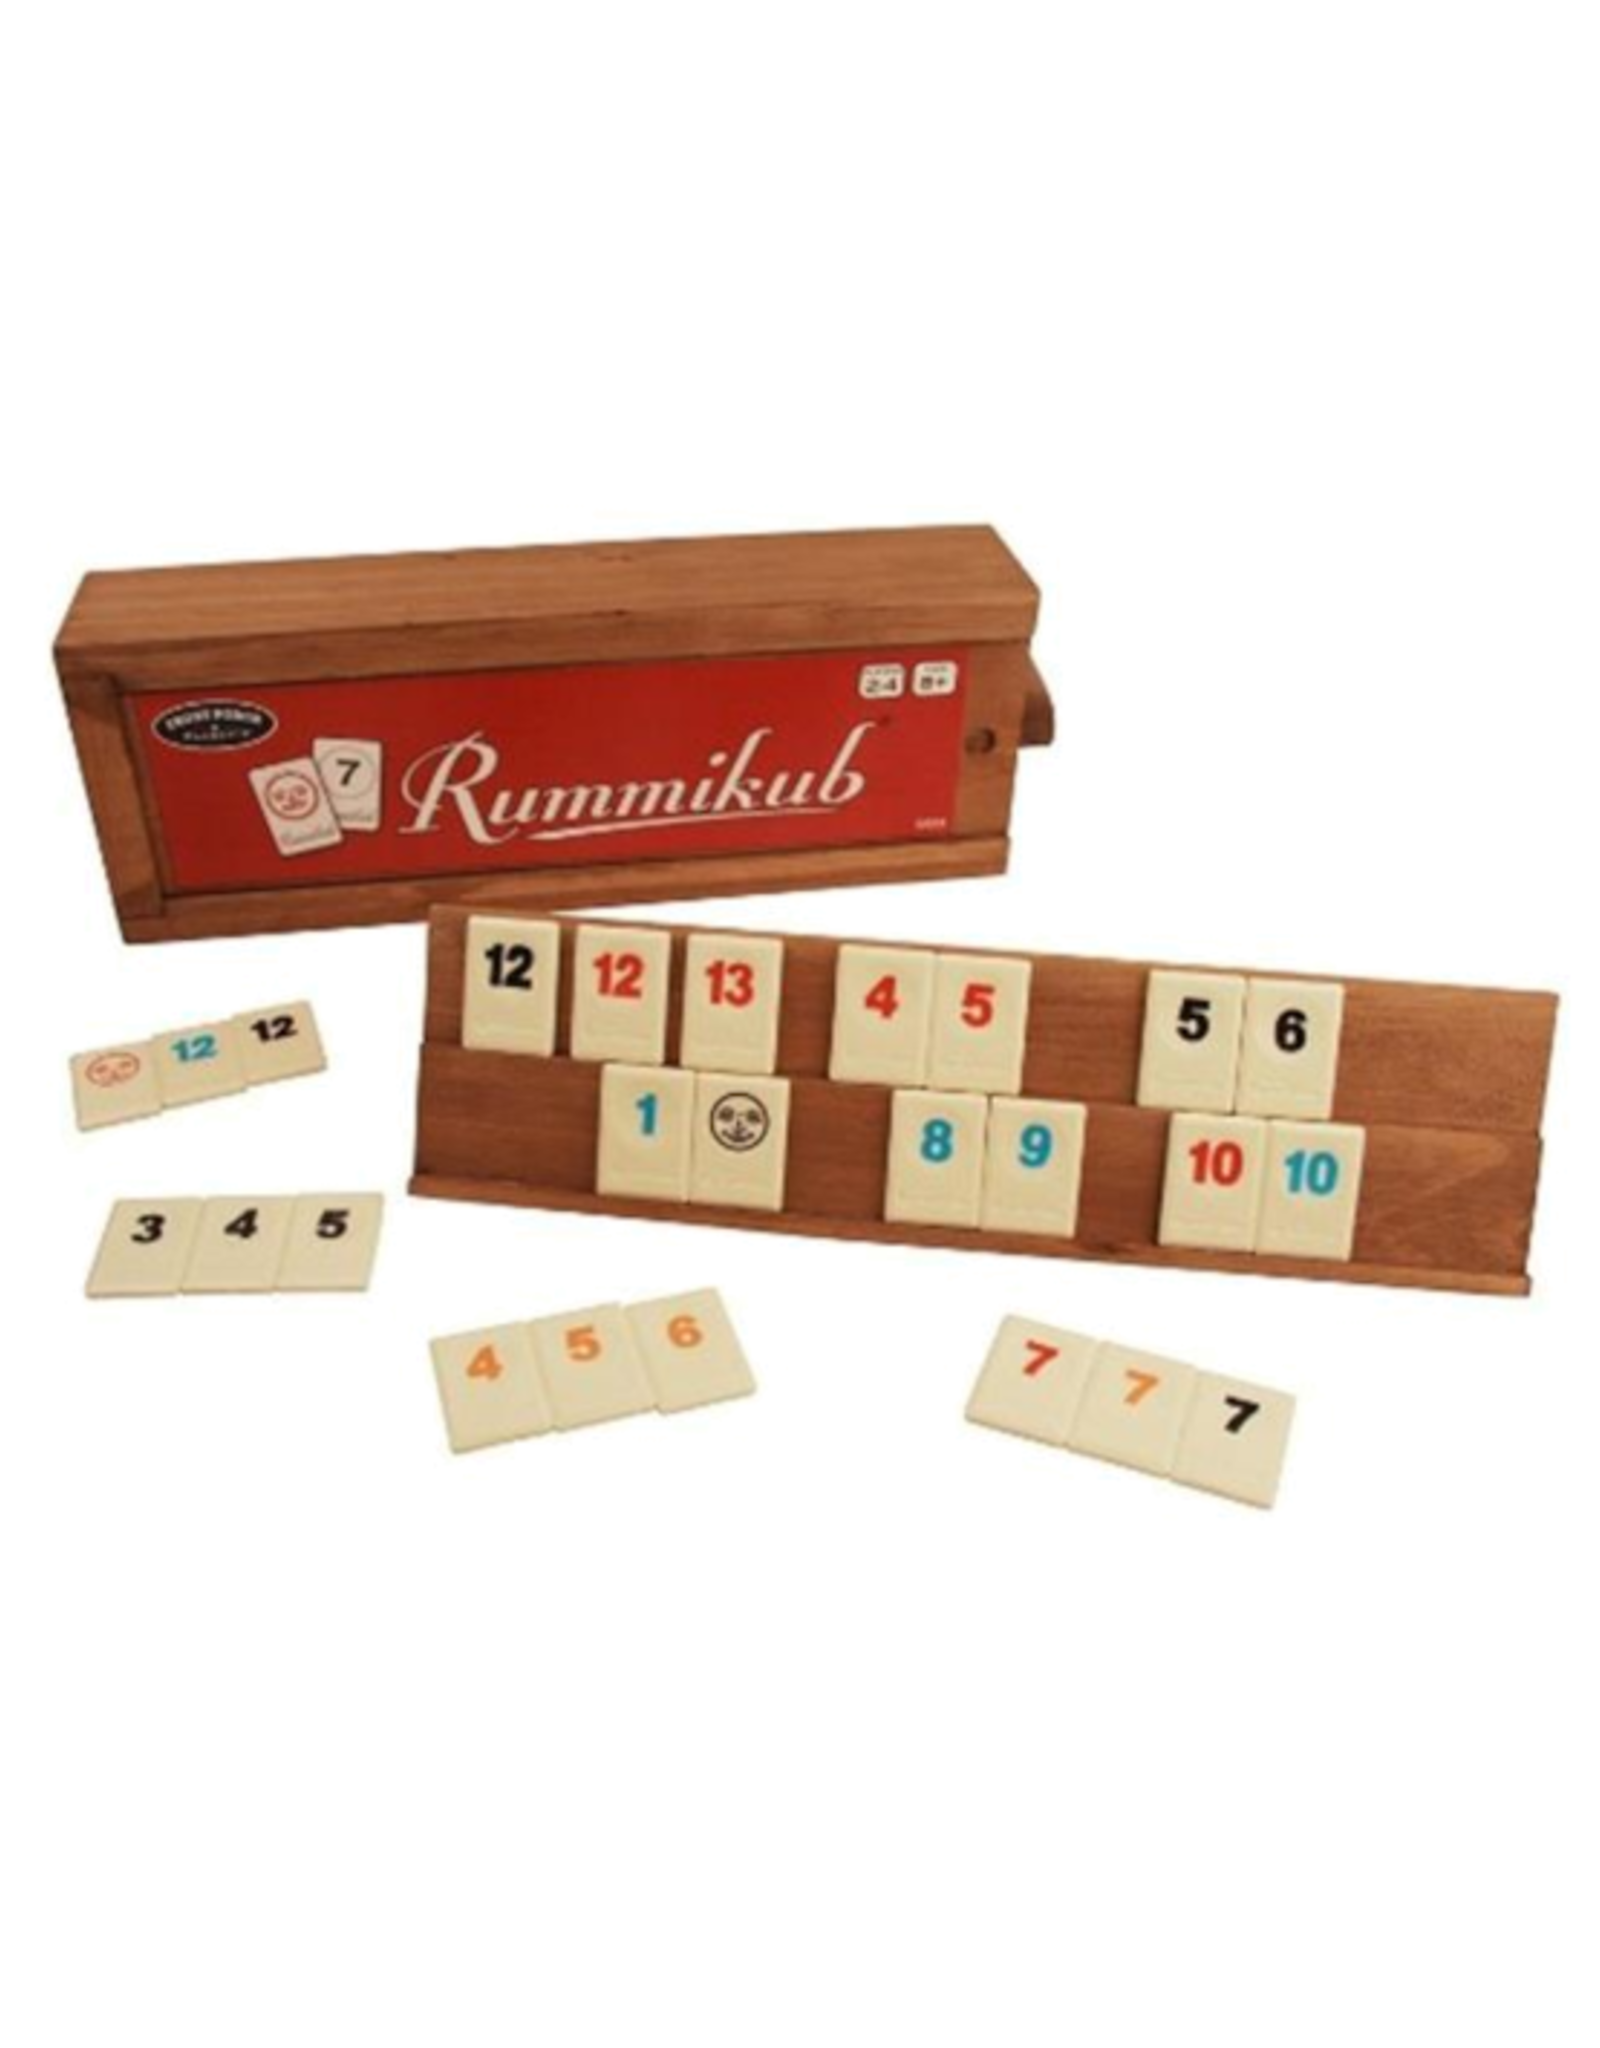  Rummy Cube Game with Case, Classic Rummy Game